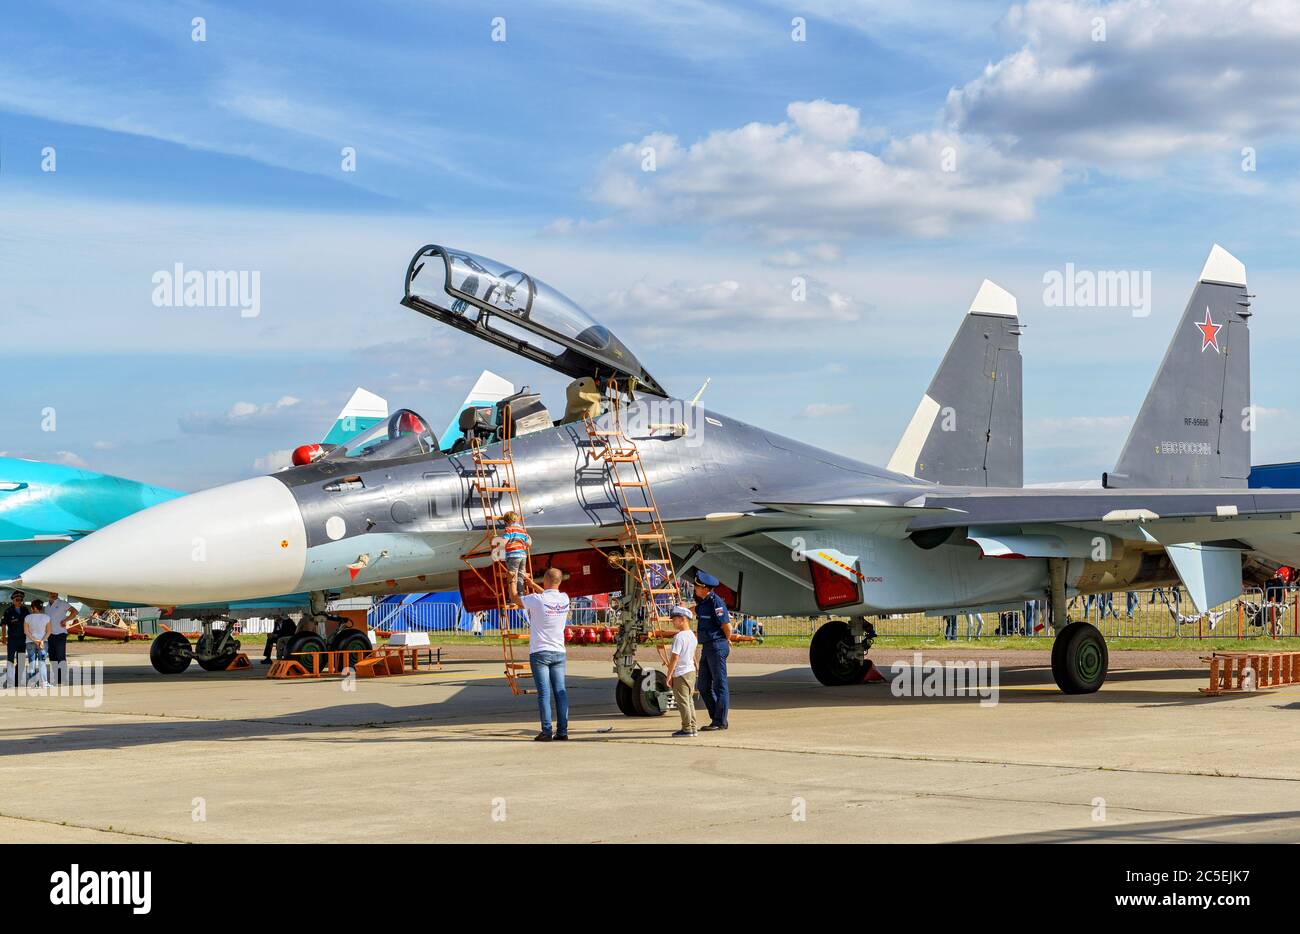 MOSCOW REGION - AUGUST 28, 2015: Russian multirole fighter Sukhoi Su-30 'Flanker-C' at the International Aviation and Space Salon (MAKS). Stock Photo